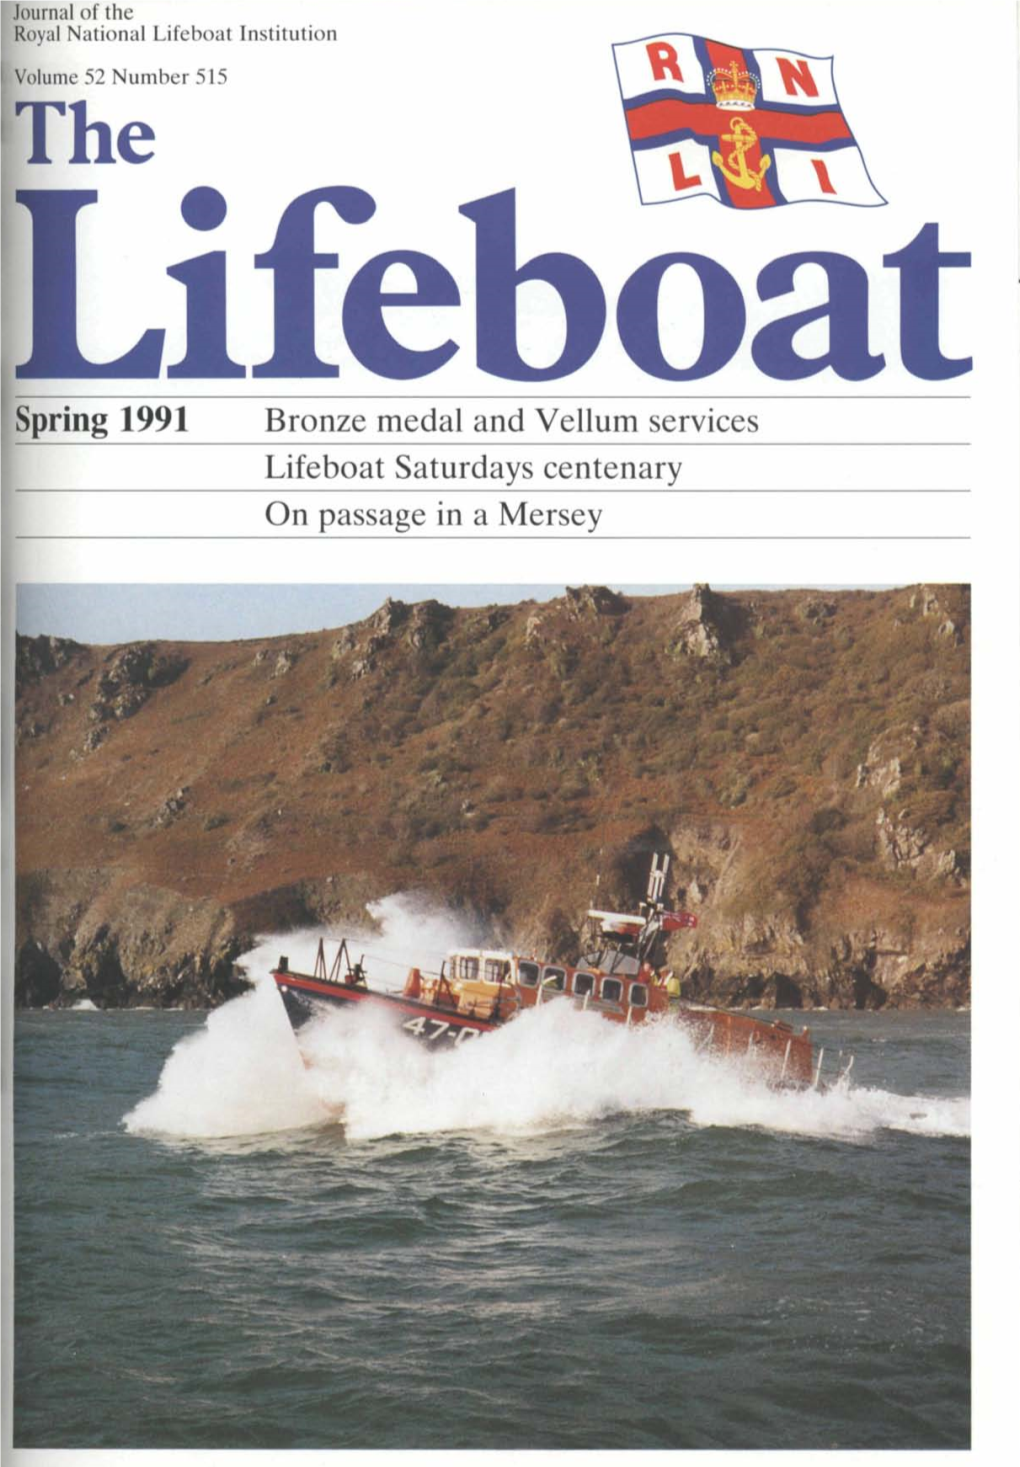 Lifeboat Institution Volume 52 Number 515 The